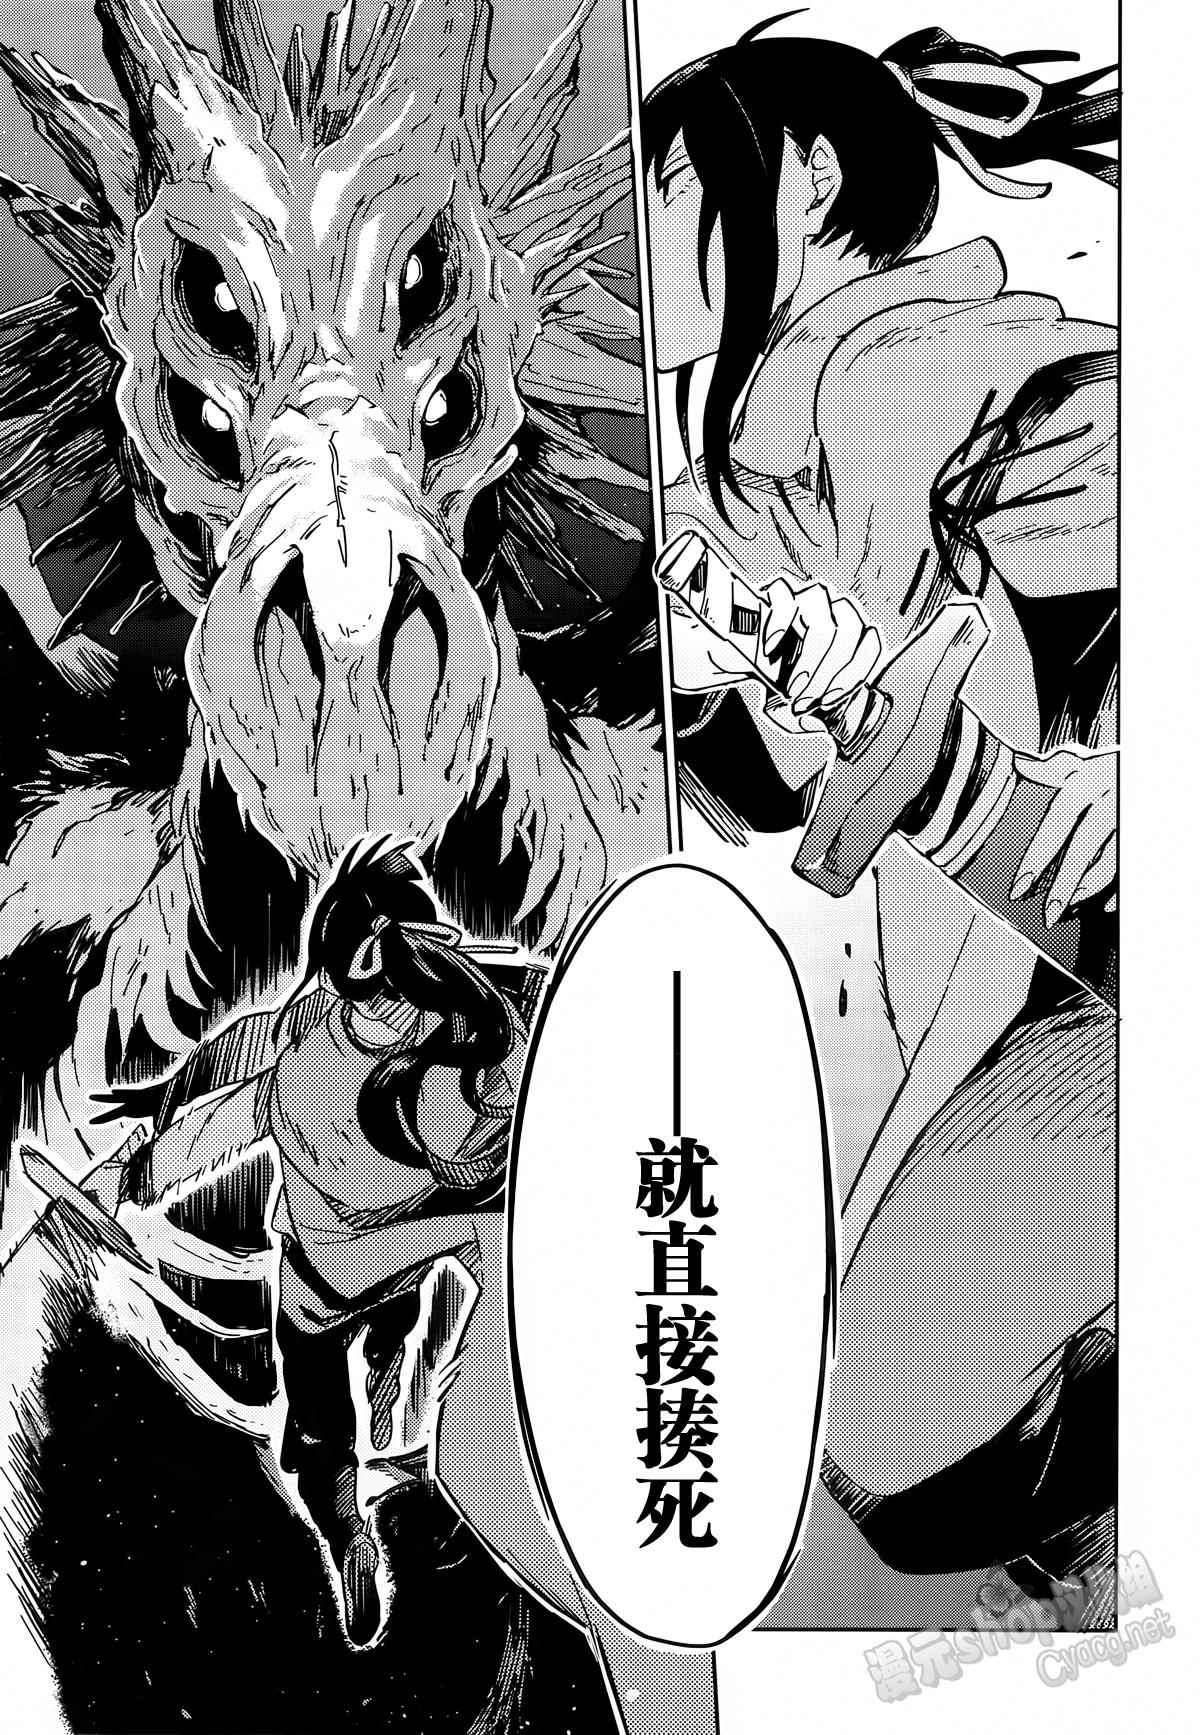 OVERLORD - 第8話 - 6